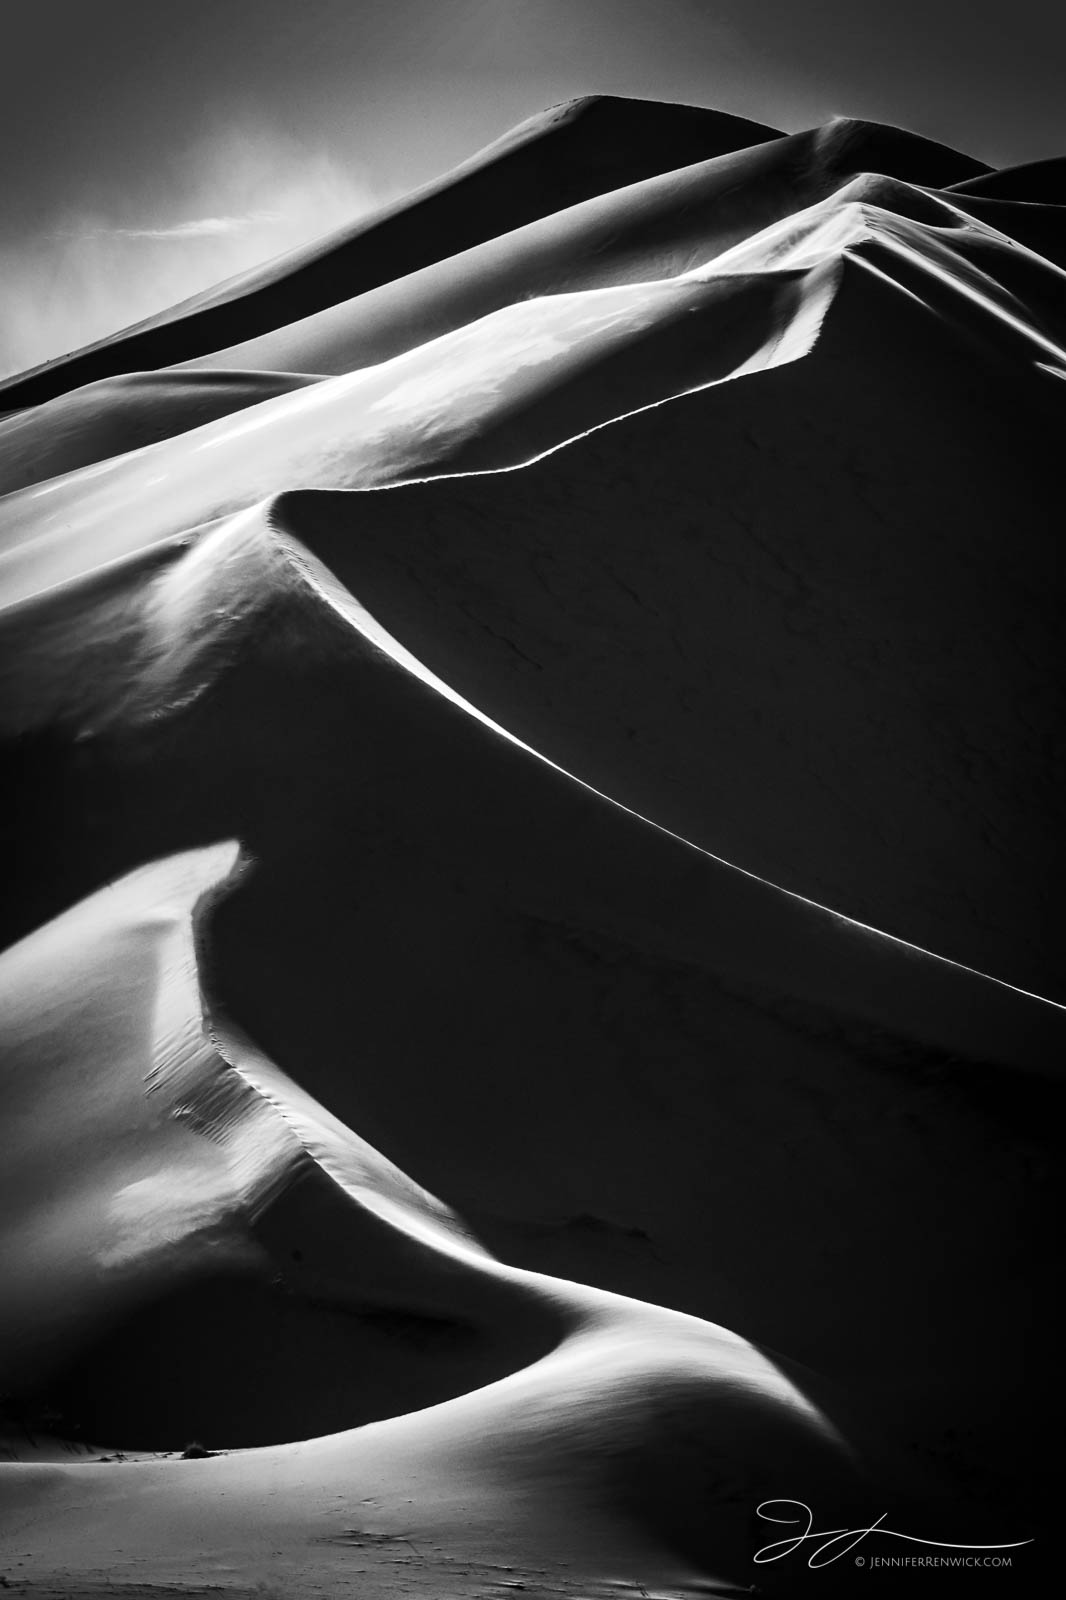 Tall sand dunes catch the light and cast shadows creating a stunning dune portrait.